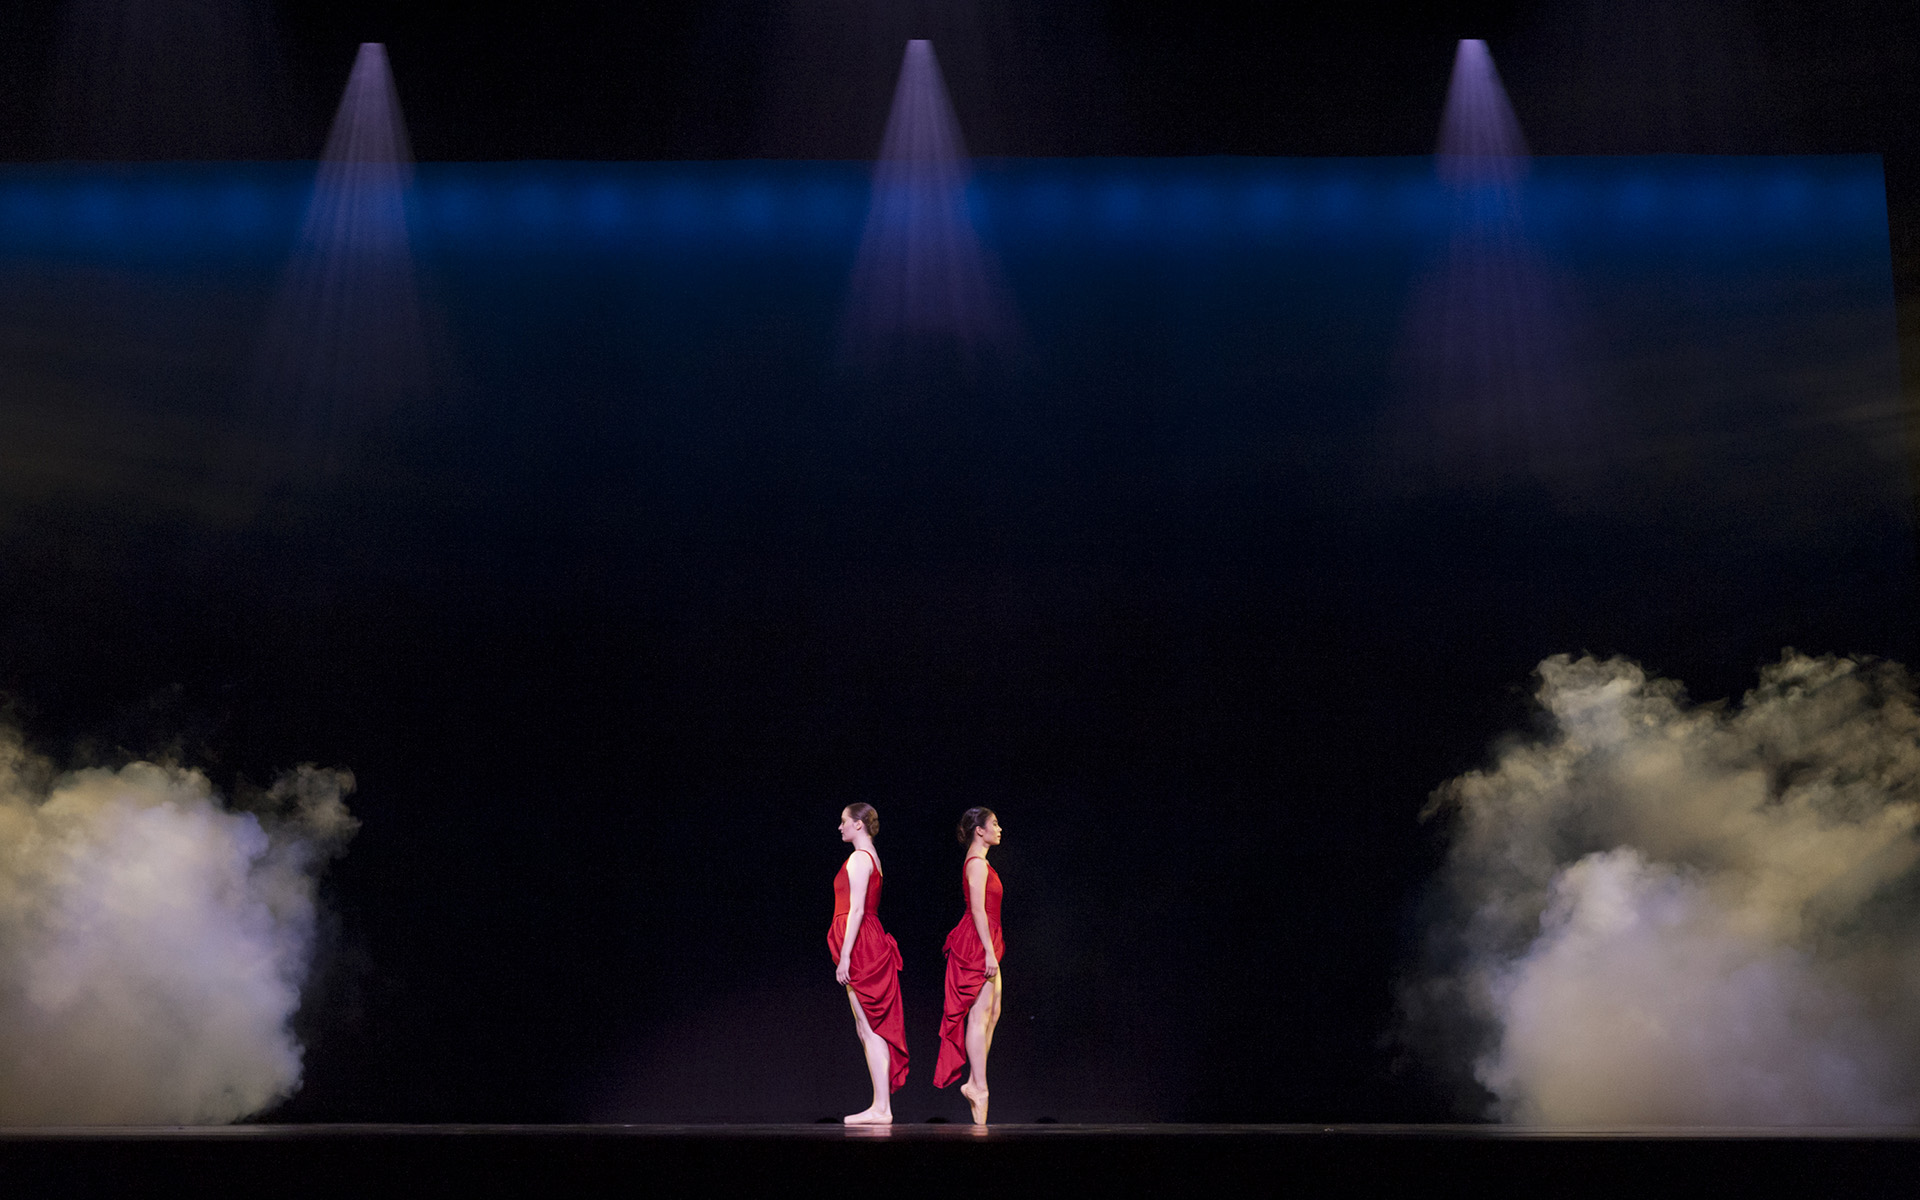 Dance Gala 2017 photo. Two female dancers in red dresses, ballet.